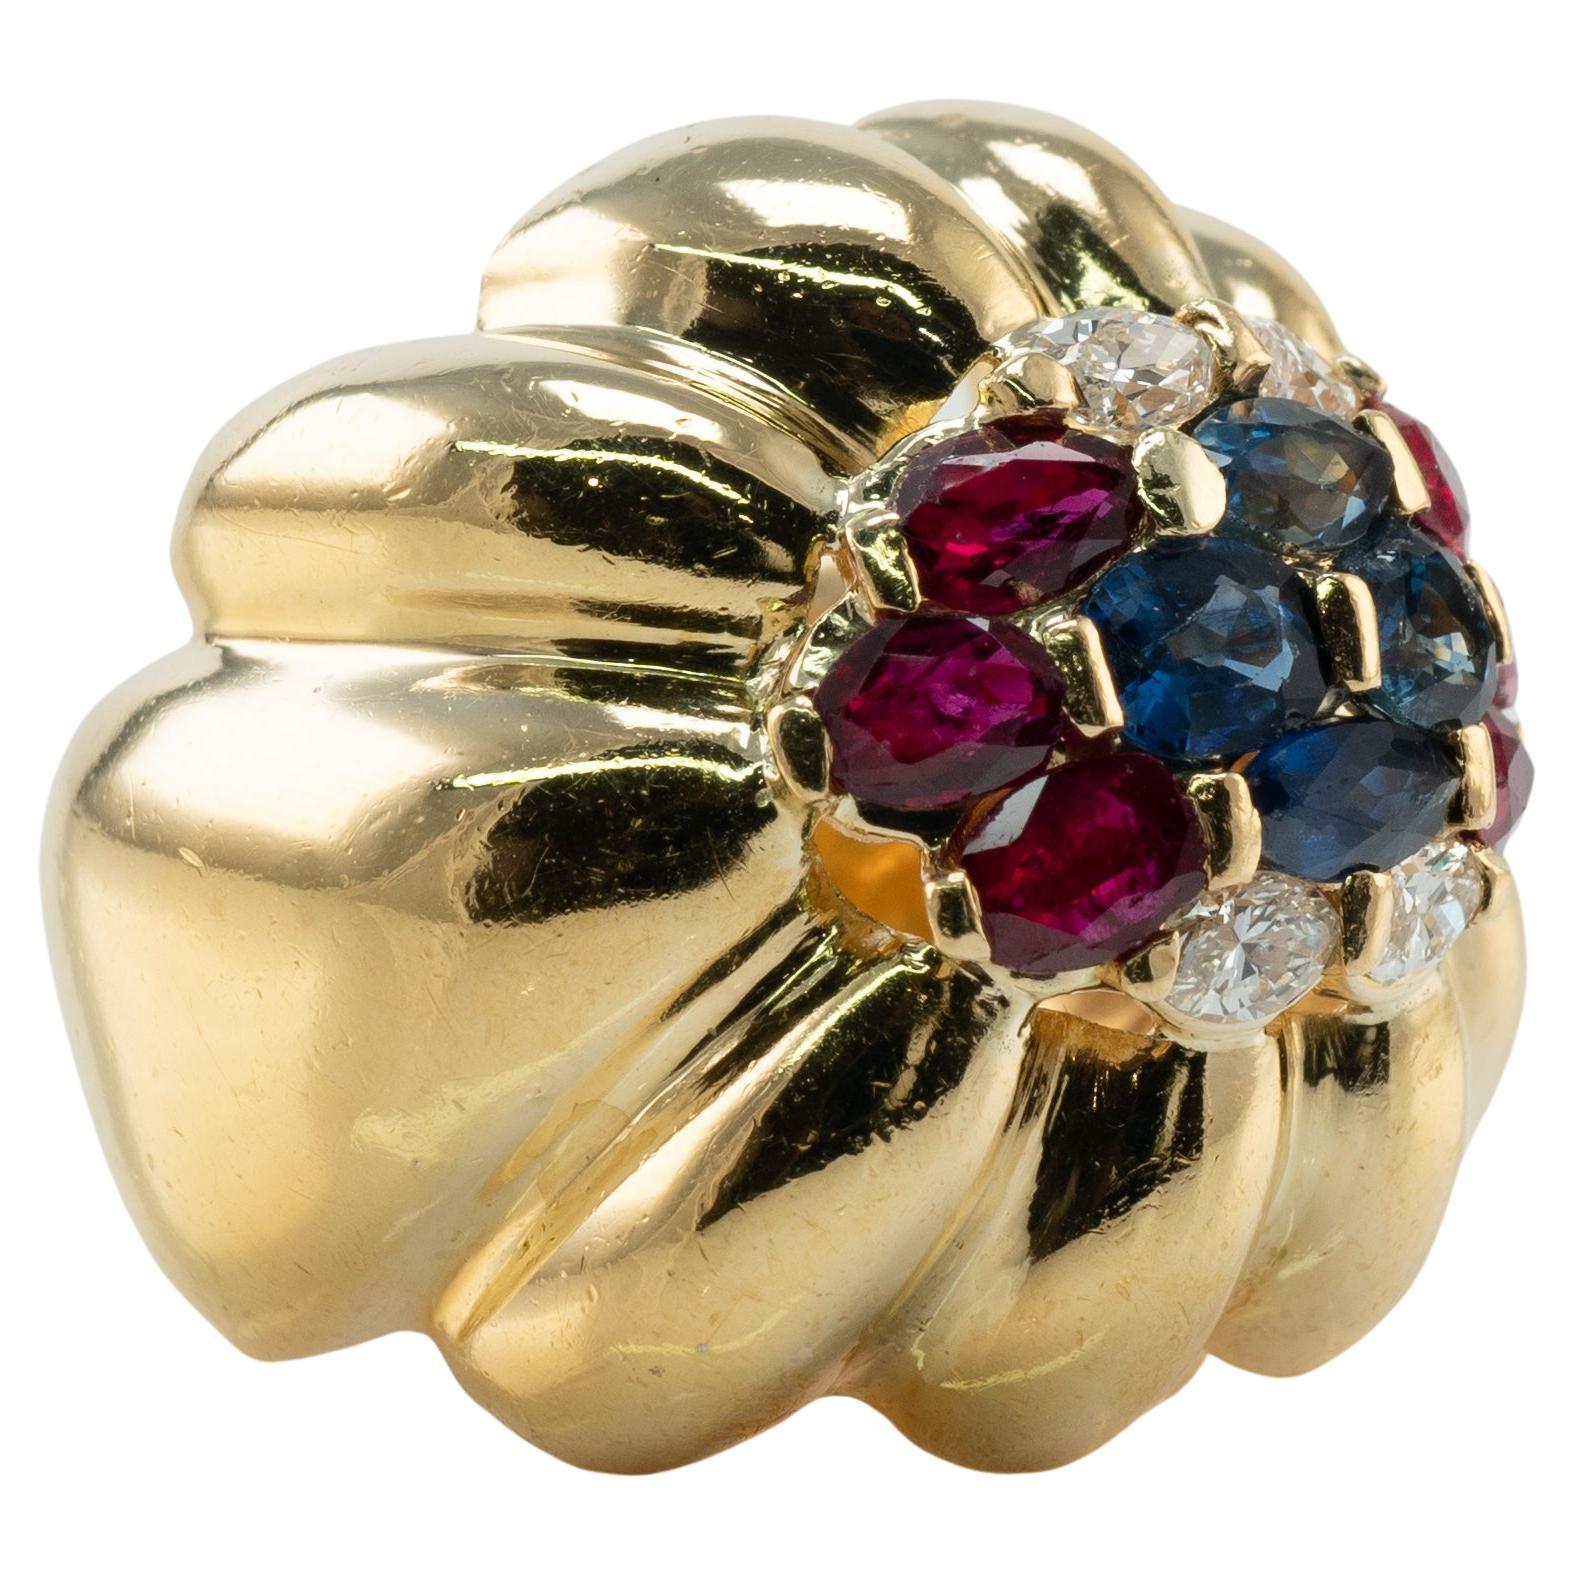 Nature Diamond Sapphire Ruby Dome Band Ring 18K Gold Vintage